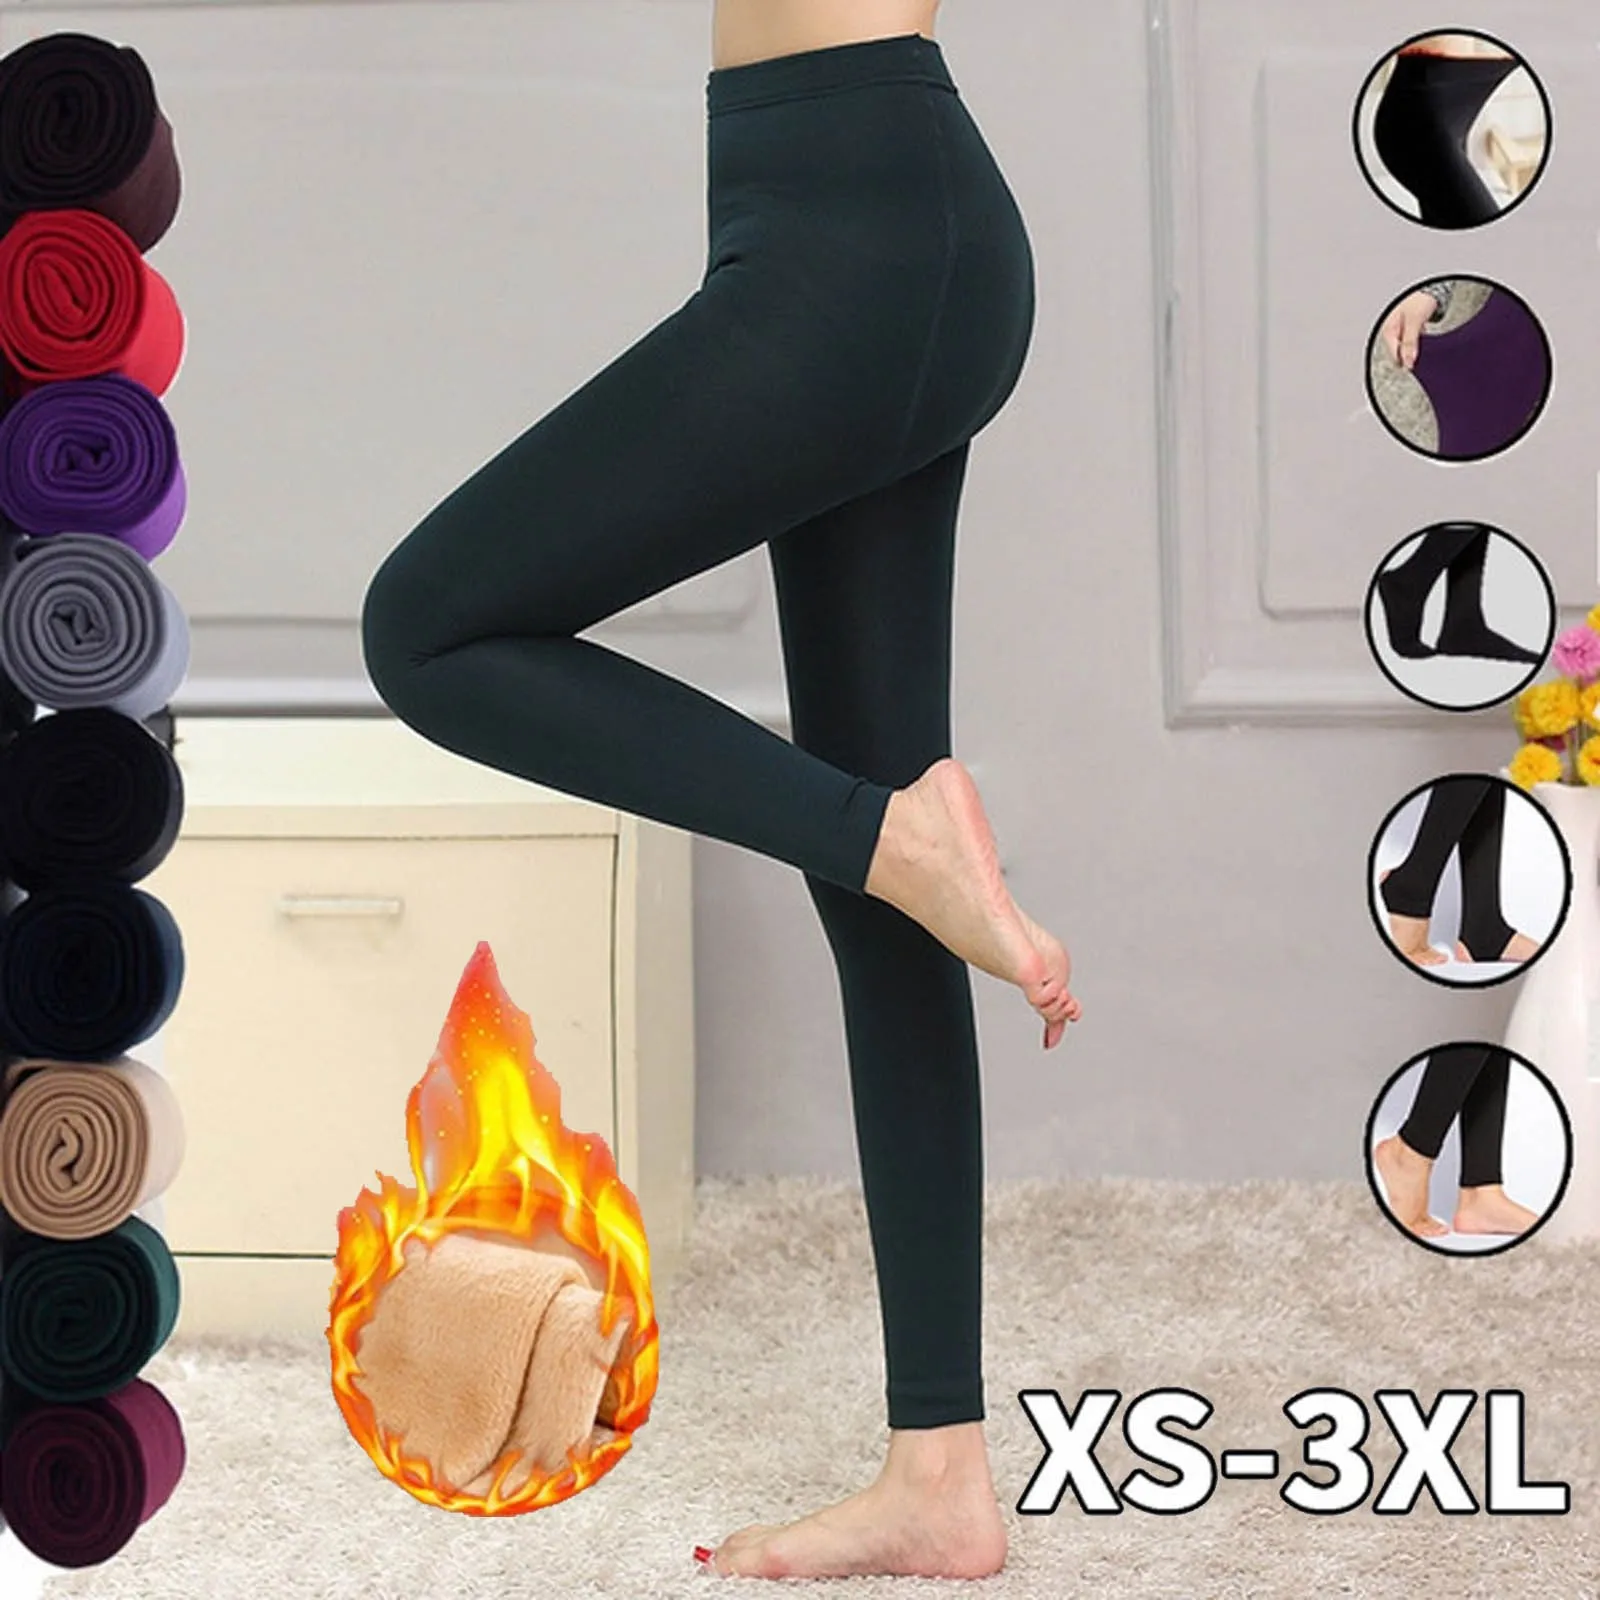 Fashion Women's Thermal Leggings Stretch Fleece Lined Winter Warm Thick Opaque Tights High Waist Ankle-Length Pants Pantalon A40 high waisted leggings